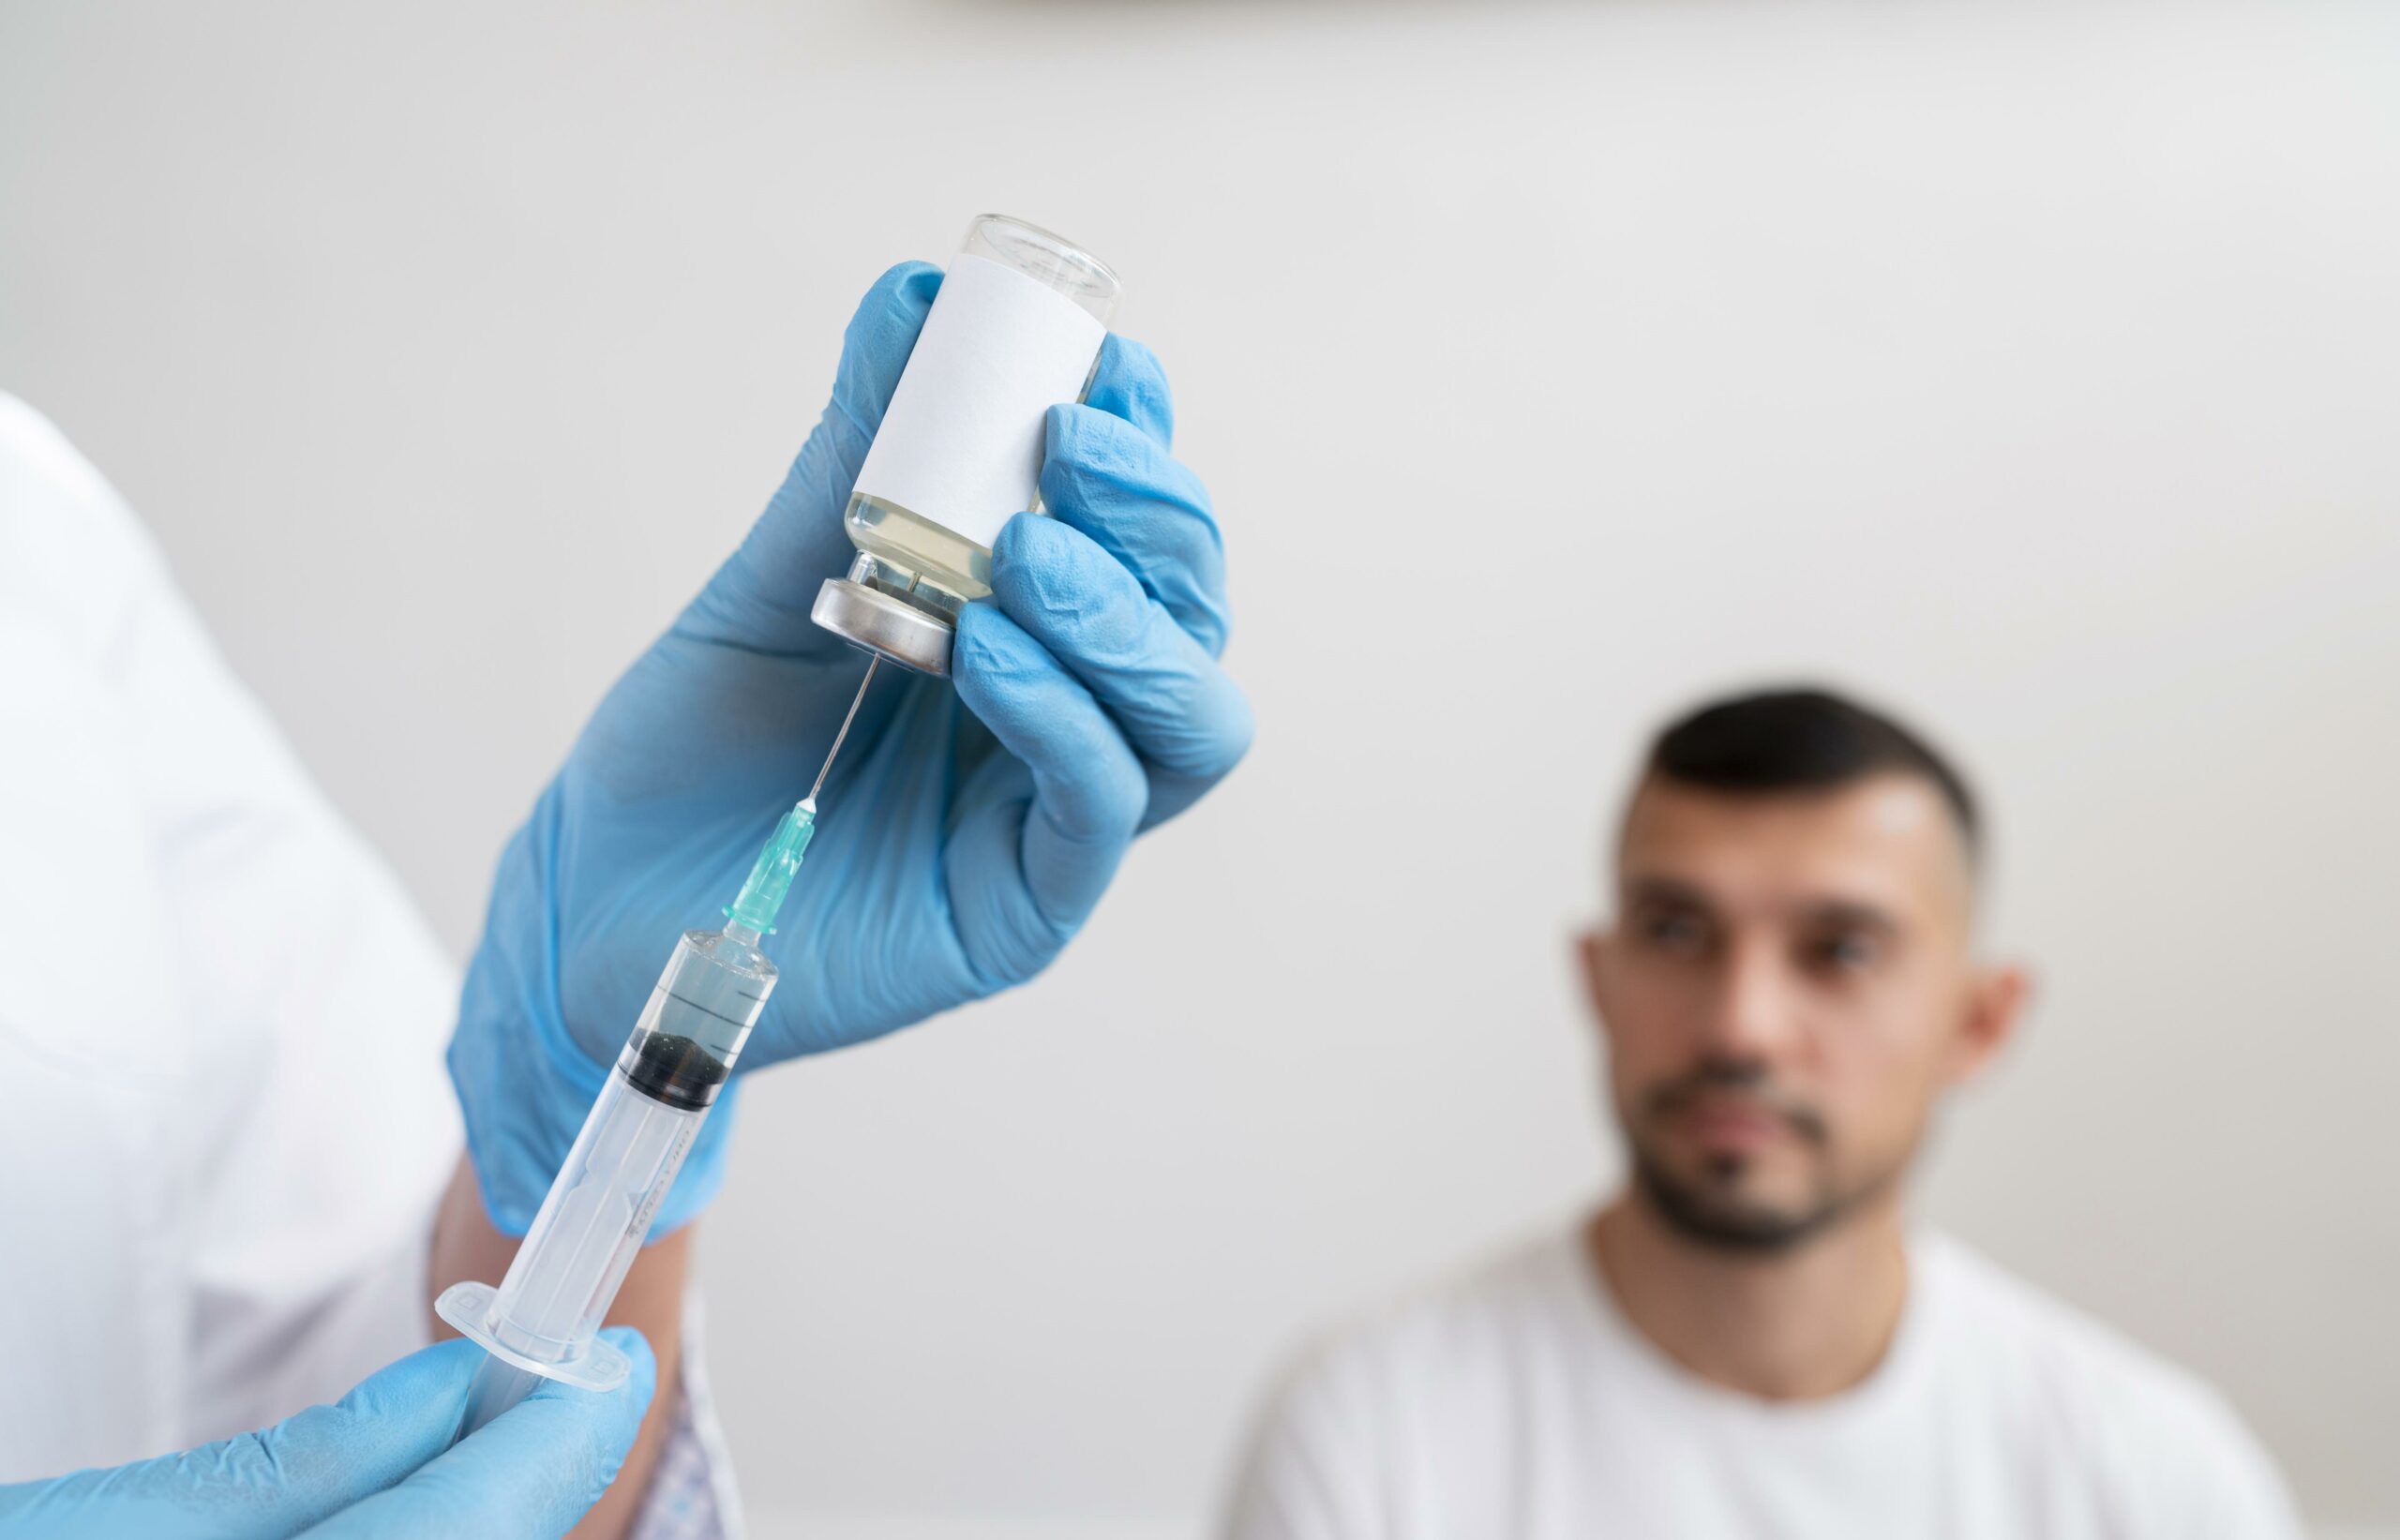 Blue-gloved hands injecting syringe into suspended vial. Slightly blurred, a dark haired bearded man in plain white tshirt sits in background looking at the blue-gloved hands injecting syringe into suspended vial